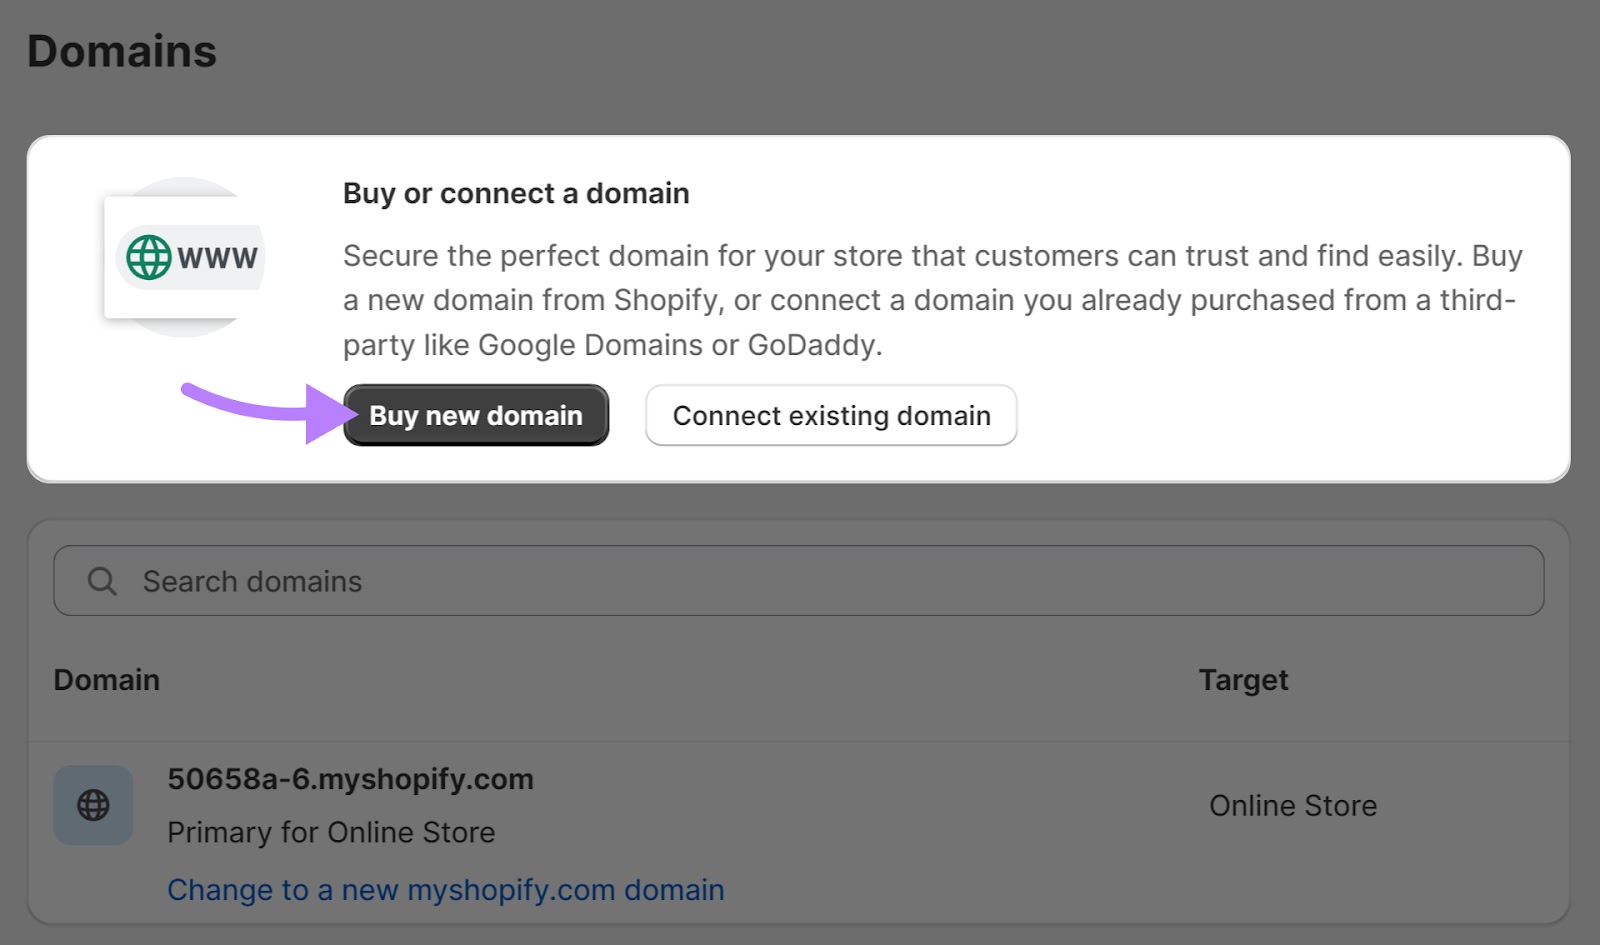 “Buy caller   domain” fastener  nether  "Domains" conception  successful  Shopify admin